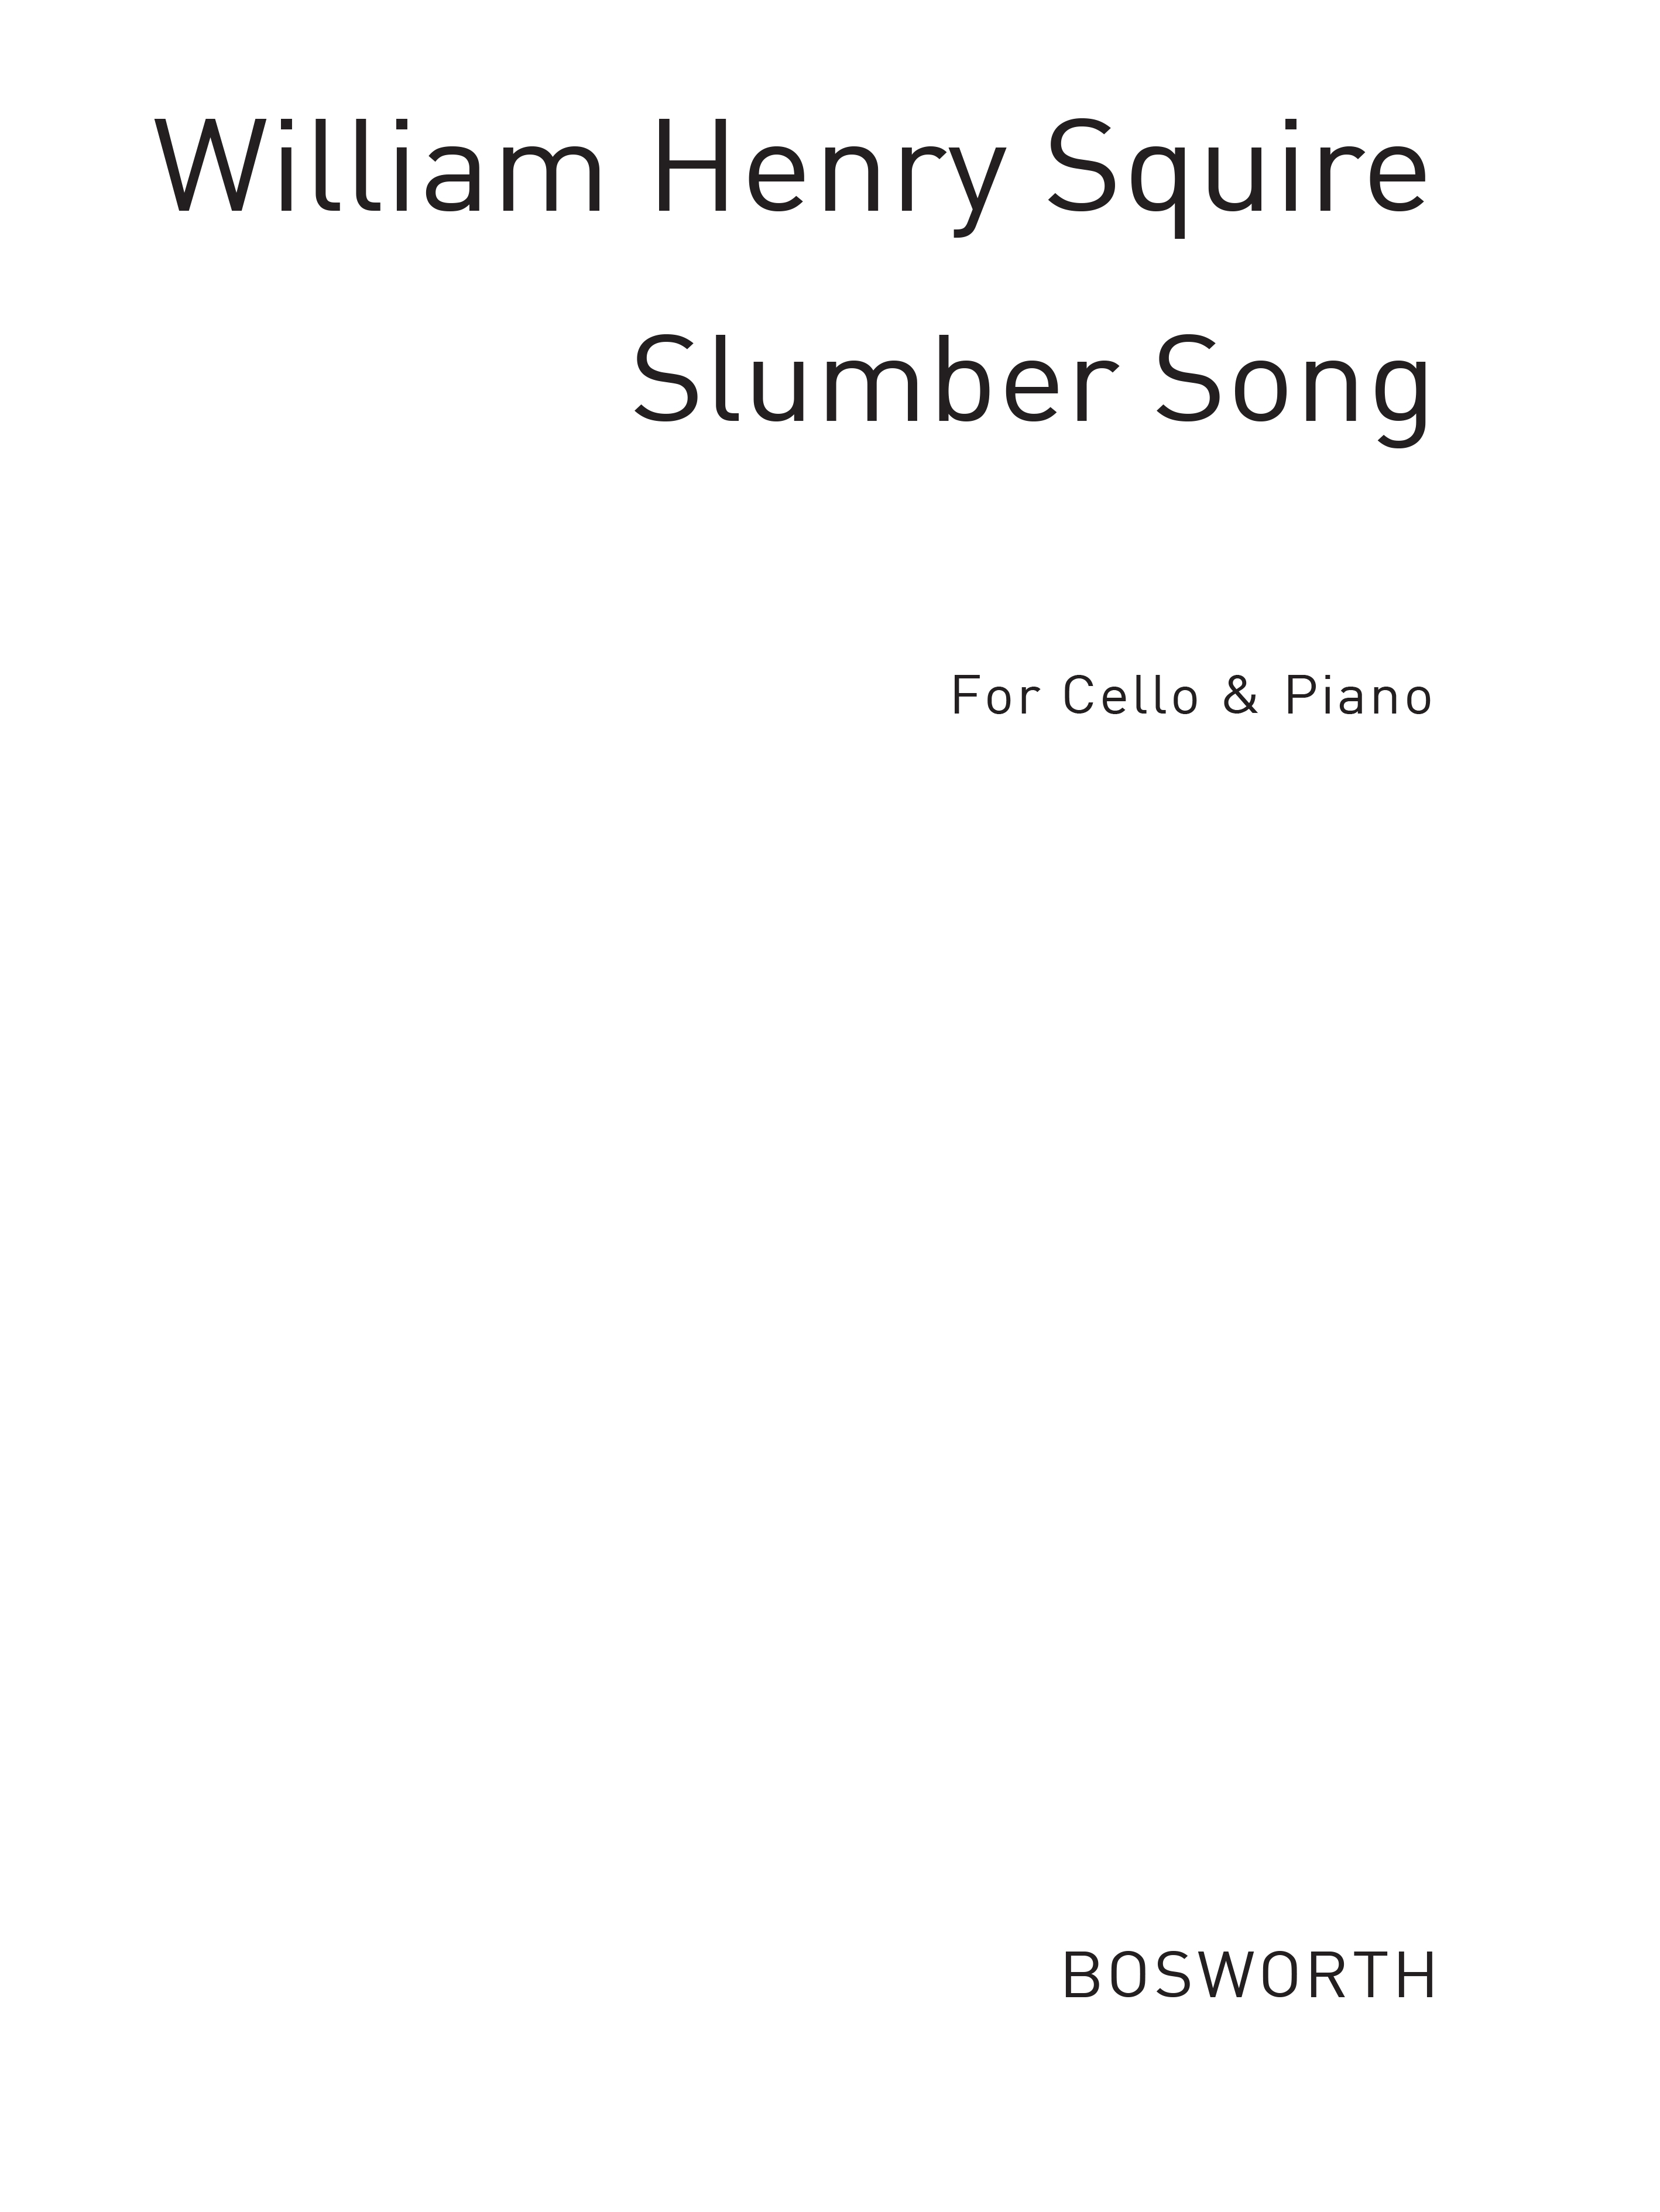 William Henry Squire: W. H. Squire: Slumber Song For Cello And Piano: Cello: